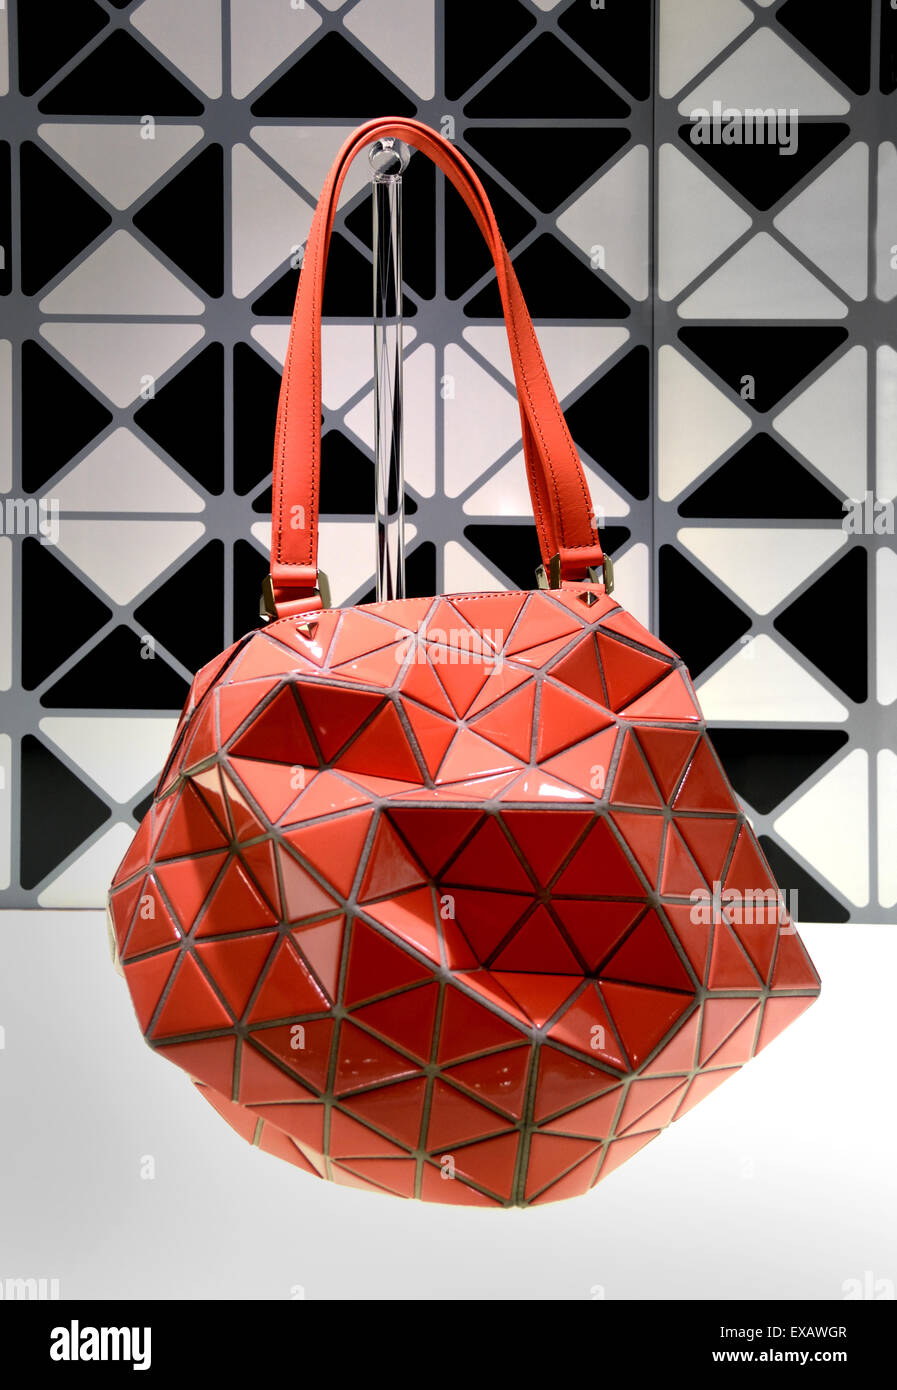 BAO BAO ISSEY MIYAKE  ( Japanese fashion designer. He is known for his technology-driven clothing designs )  Hong Kong Fashion Store China Chinese Stock Photo